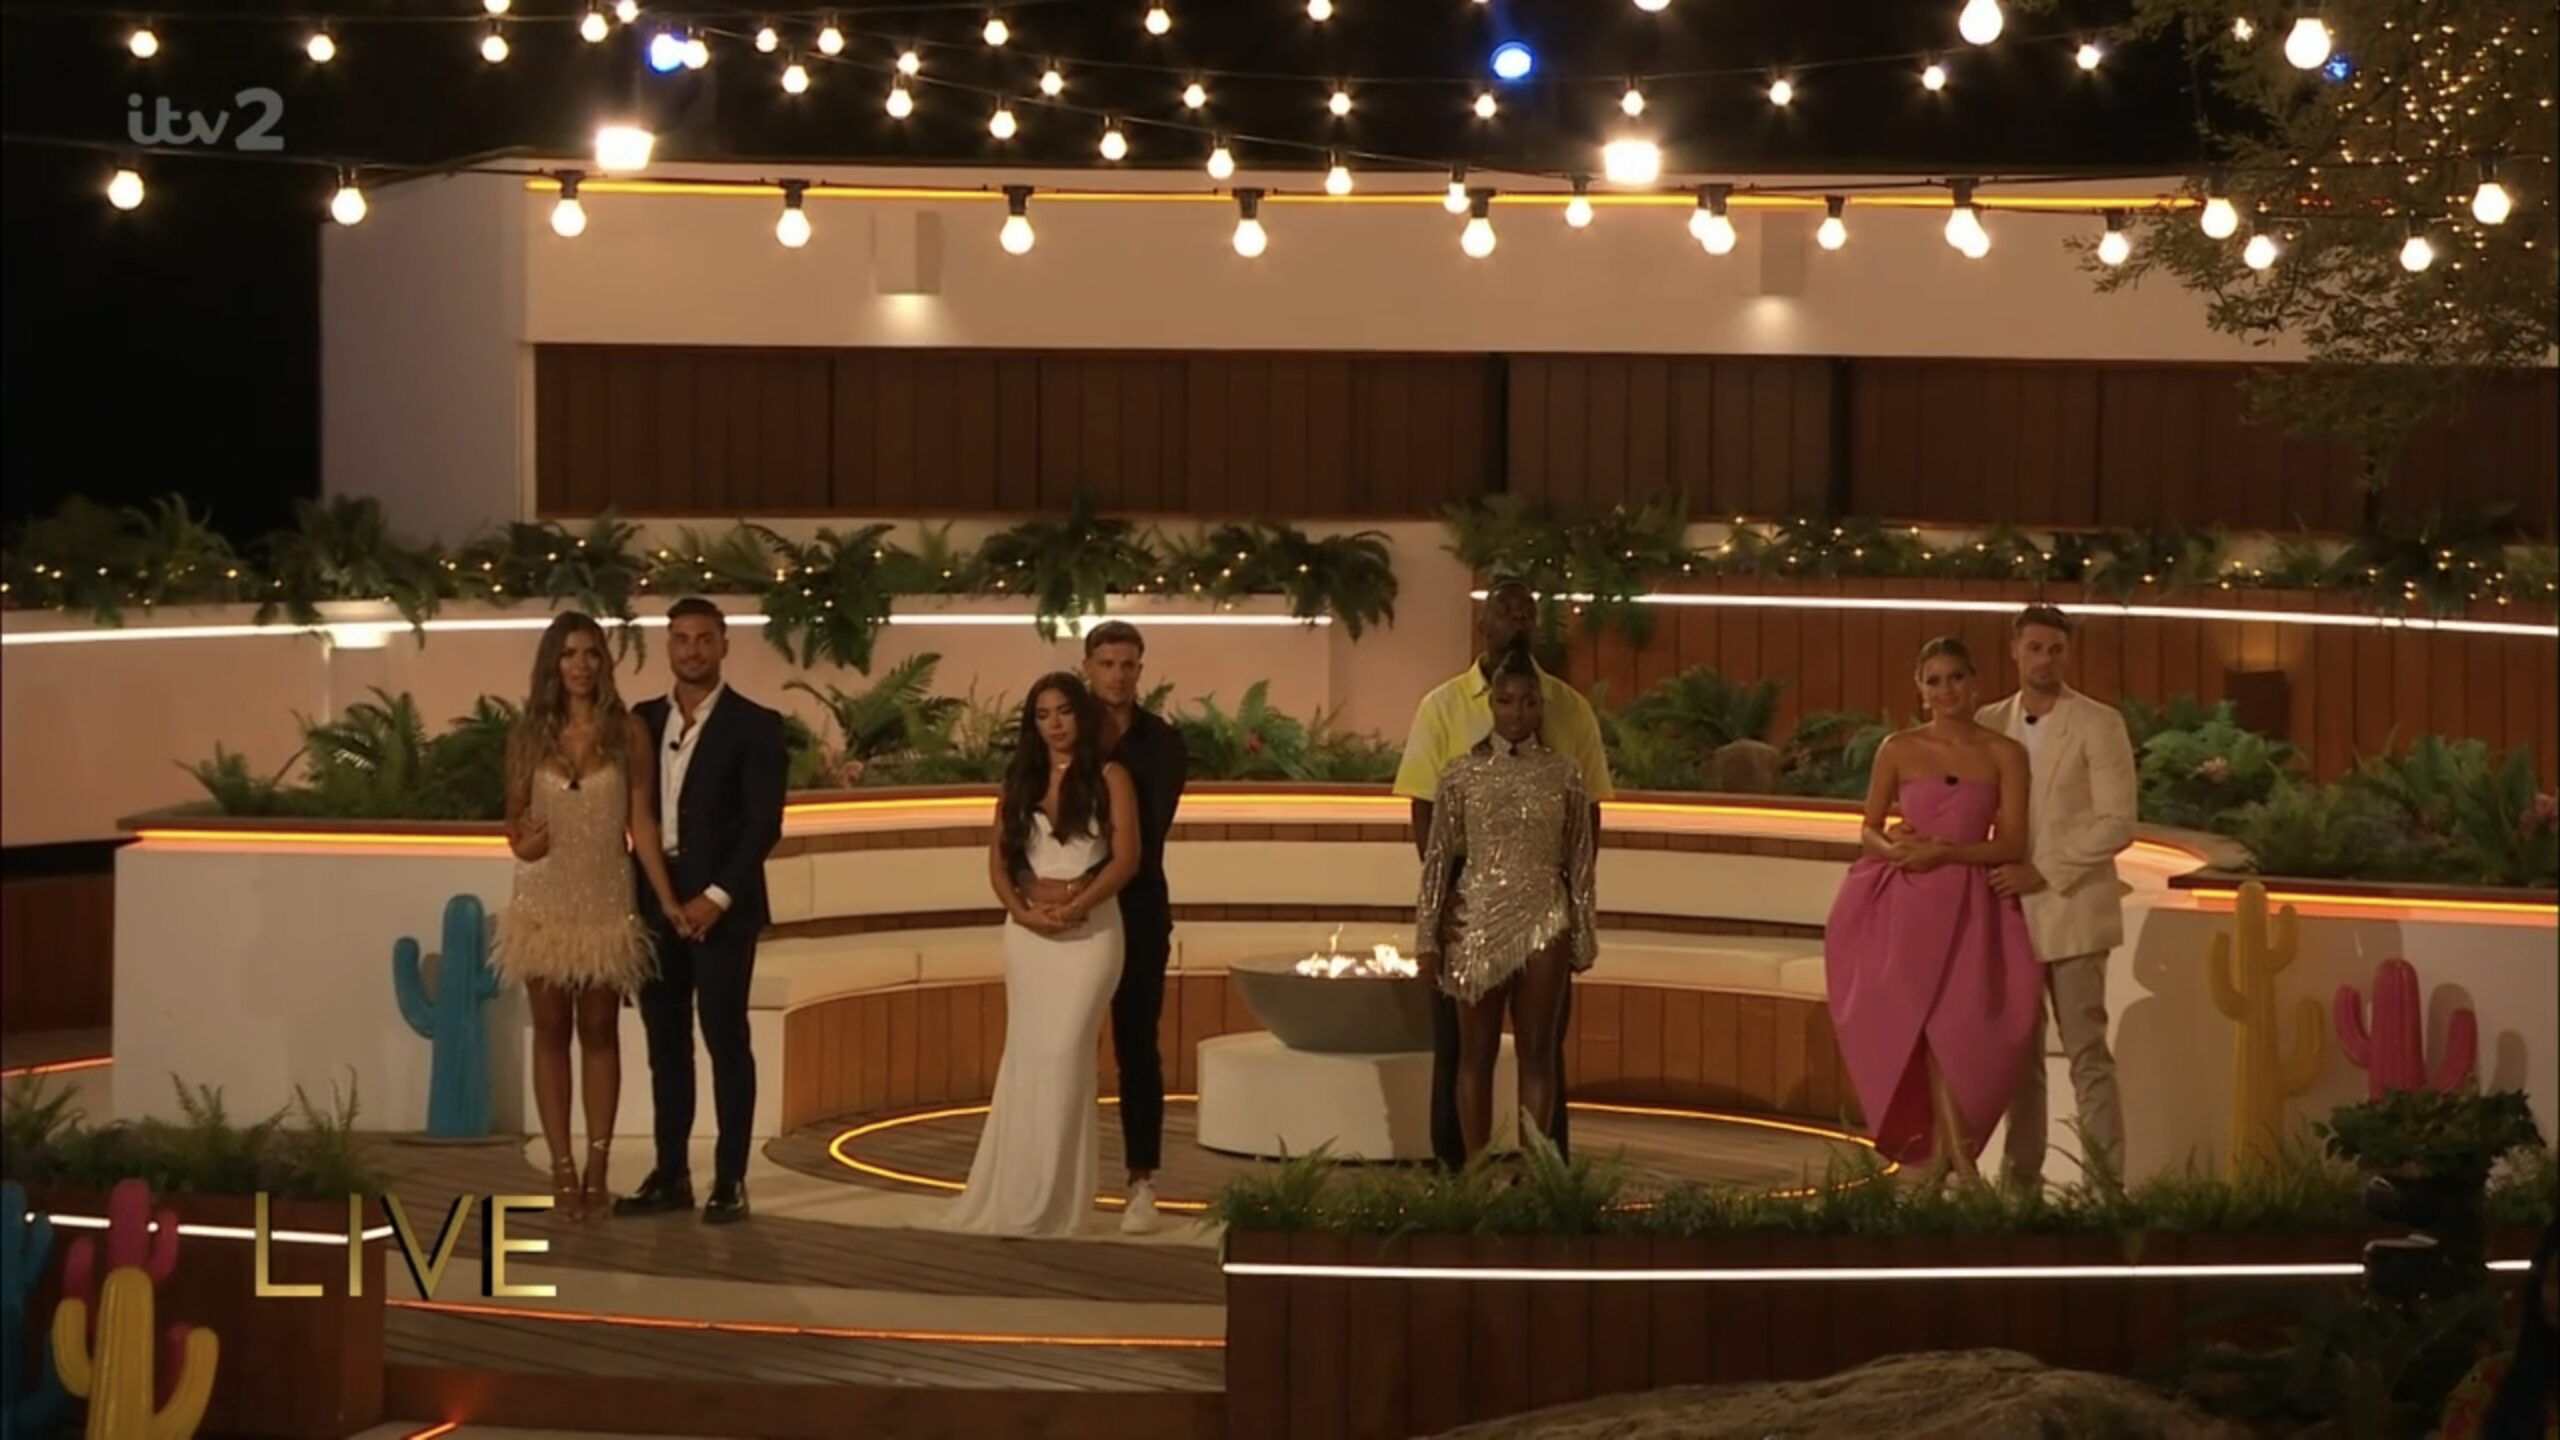 Who won Love Island 2022 revealed in final results full recap! TellyMix